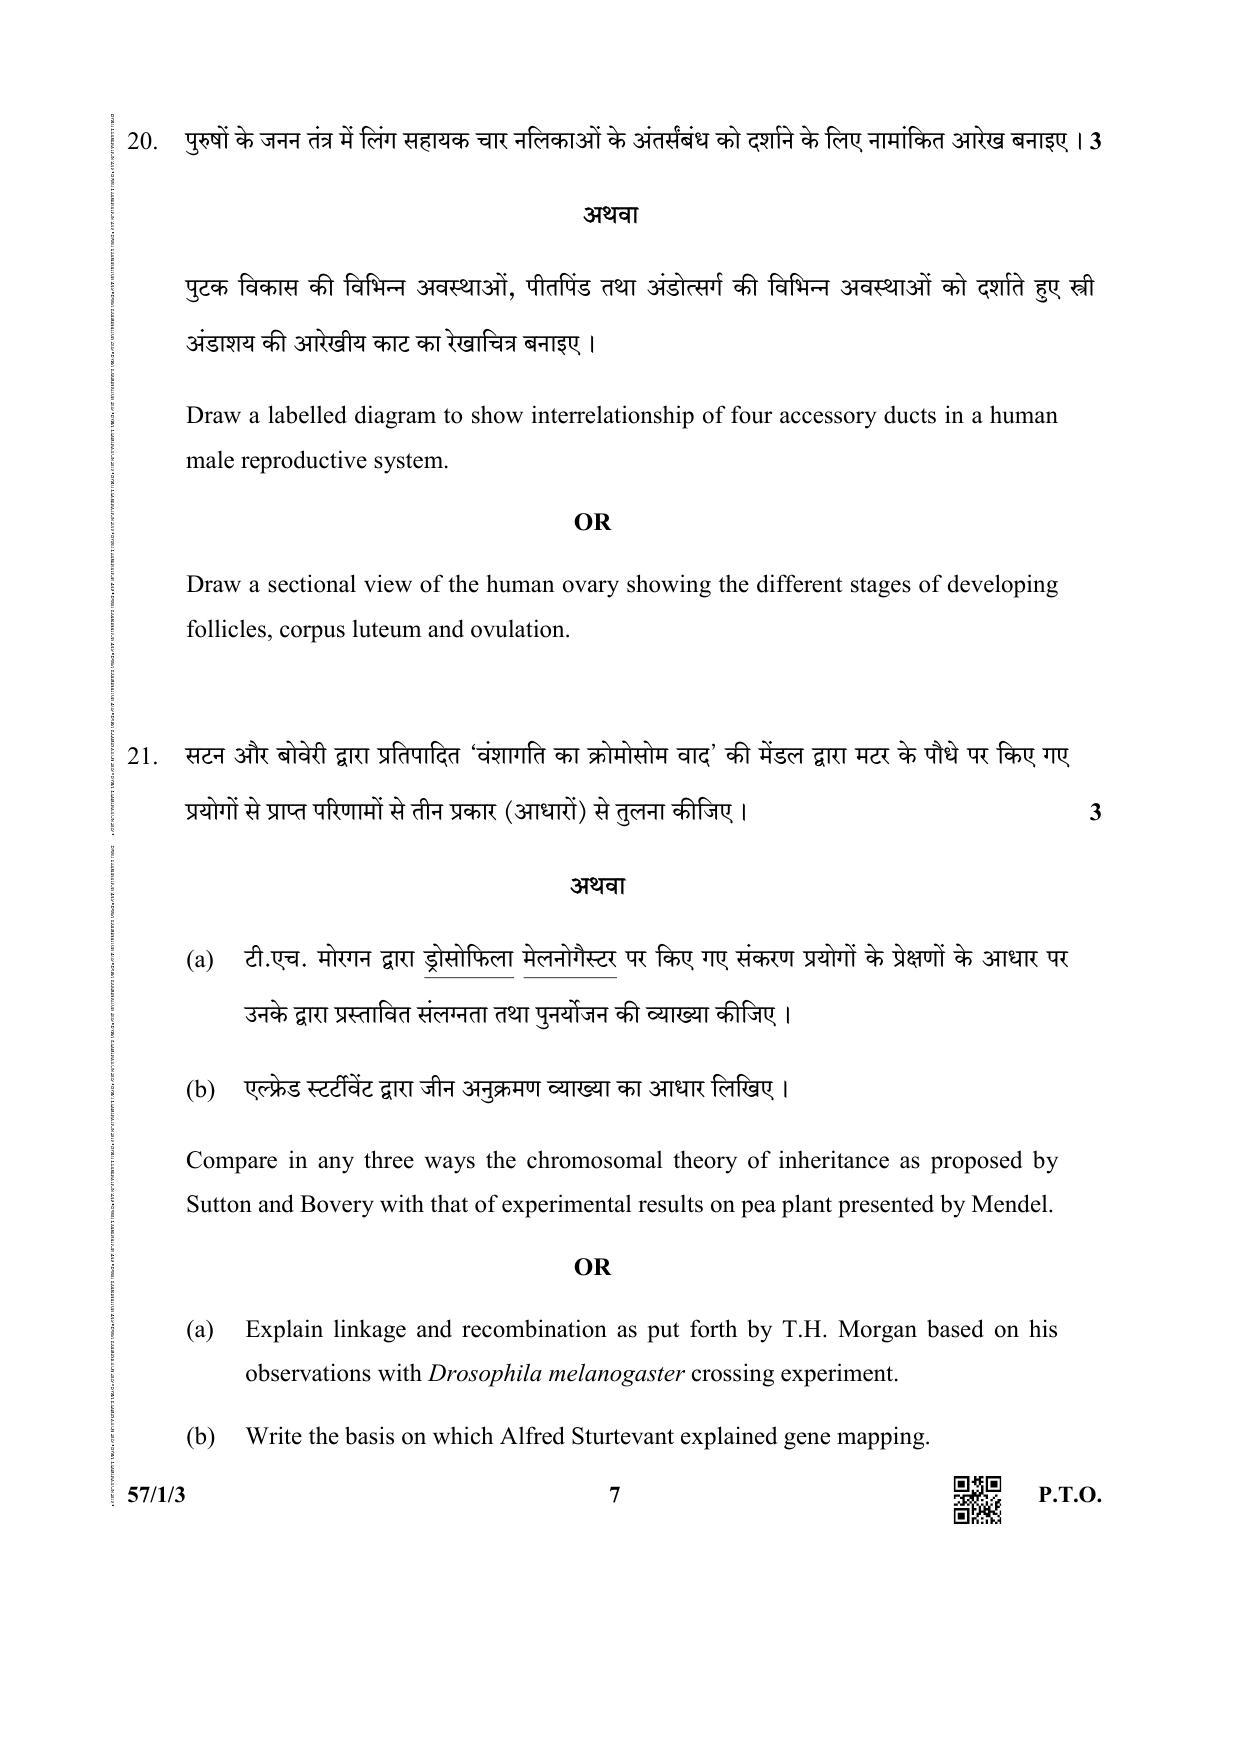 CBSE Class 12 57-3 (Biology) 2019 Question Paper - Page 7